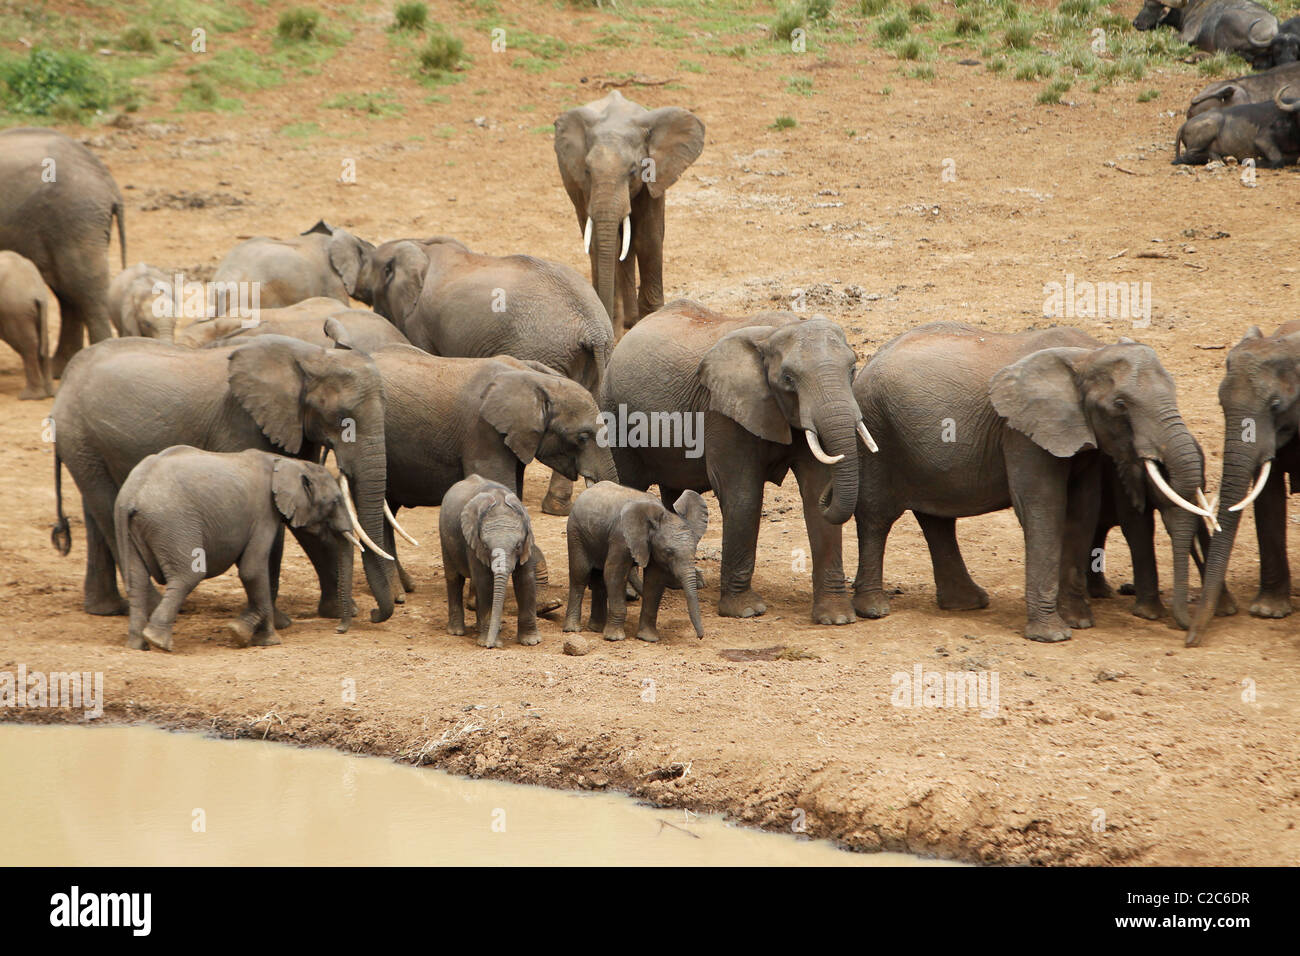 A herd of African Elephants at a watering hole in Kenya Stock Photo